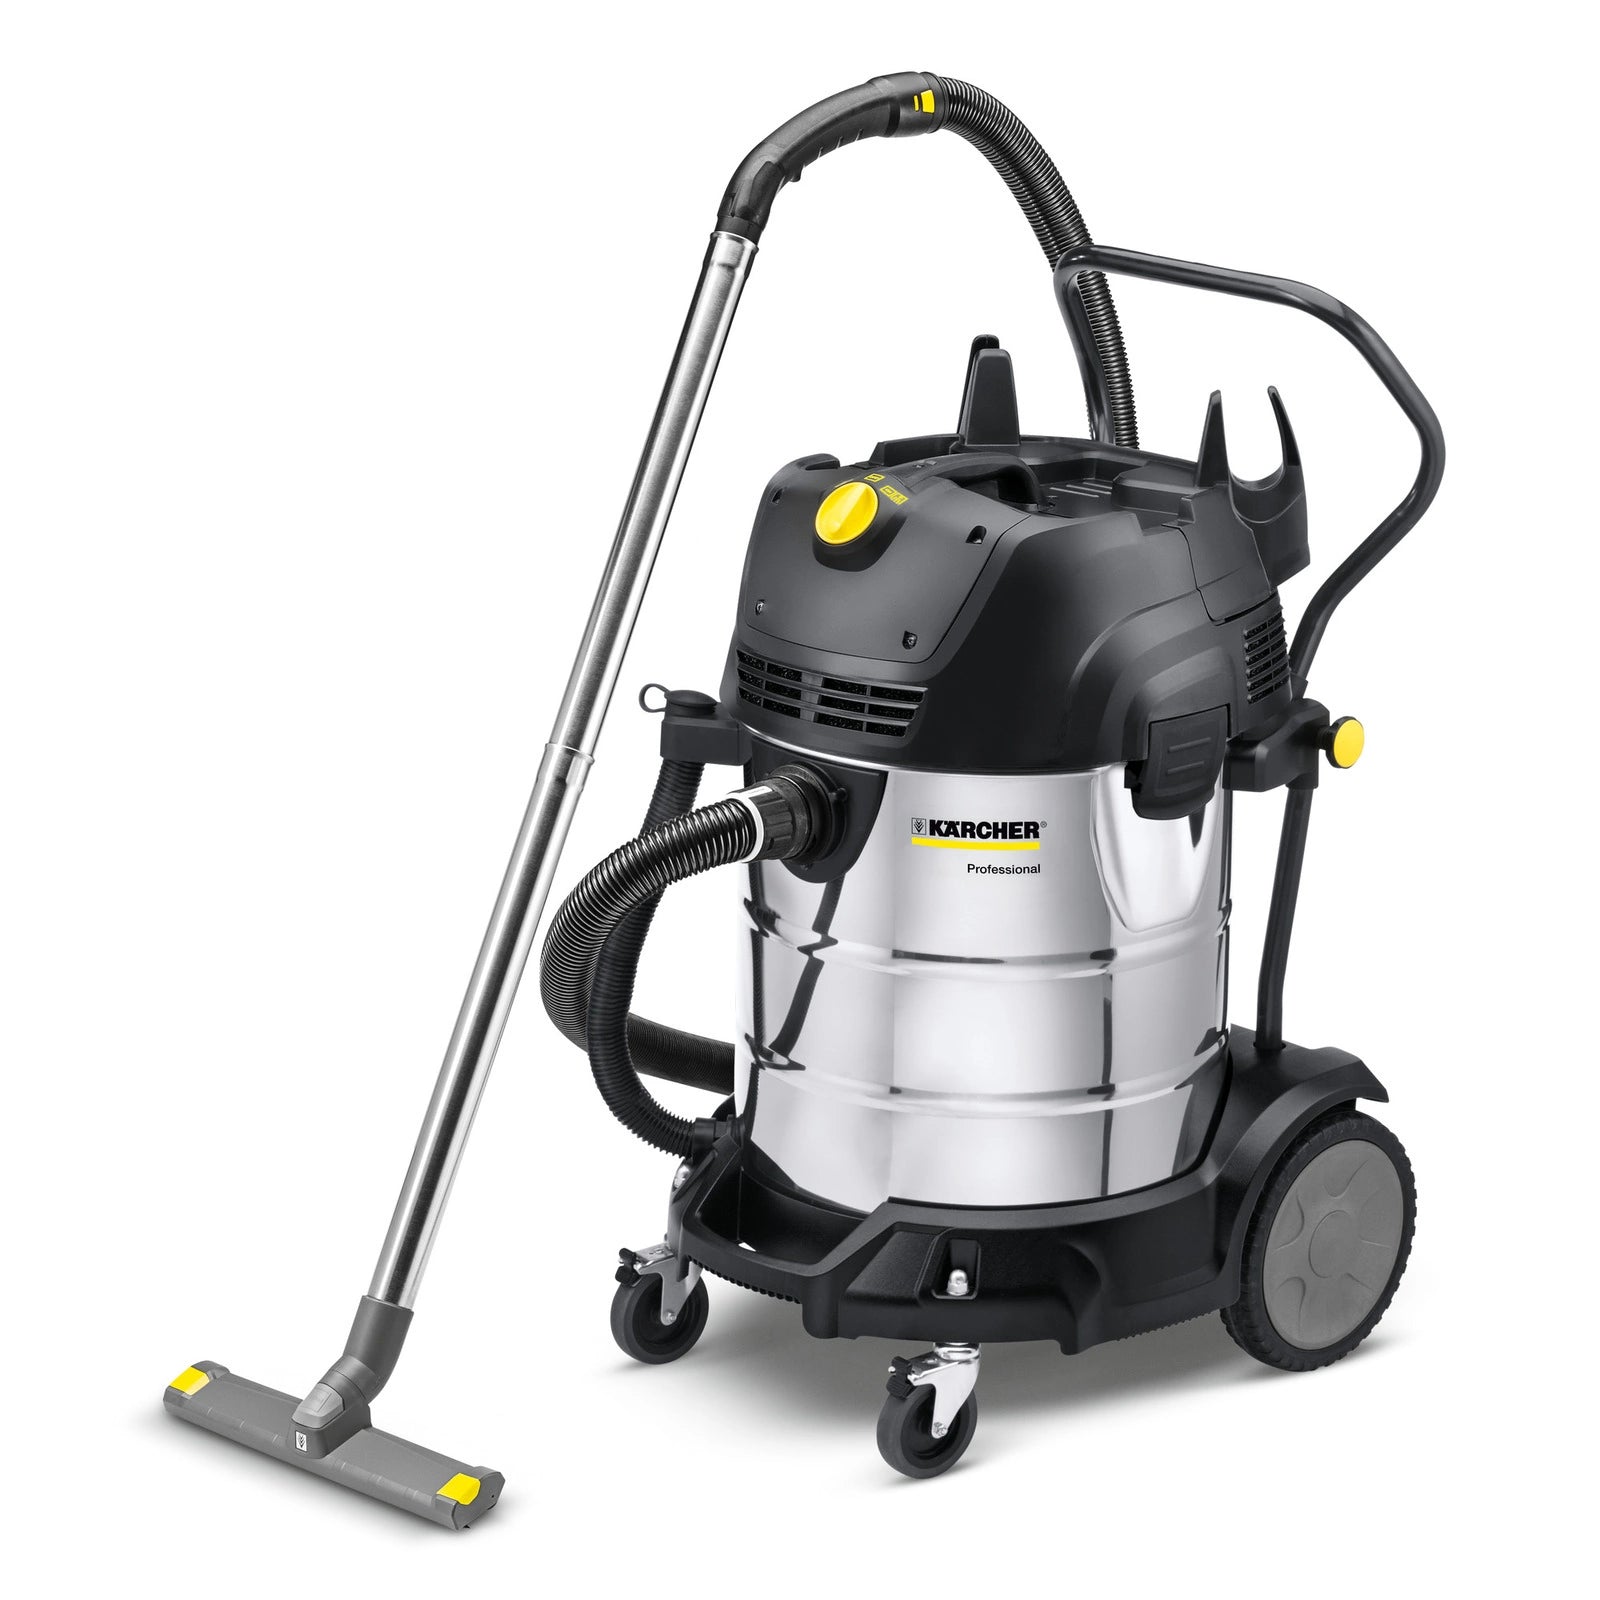 Kärcher wet and dry vacuum cleaner NT 75/2 Tact² Me